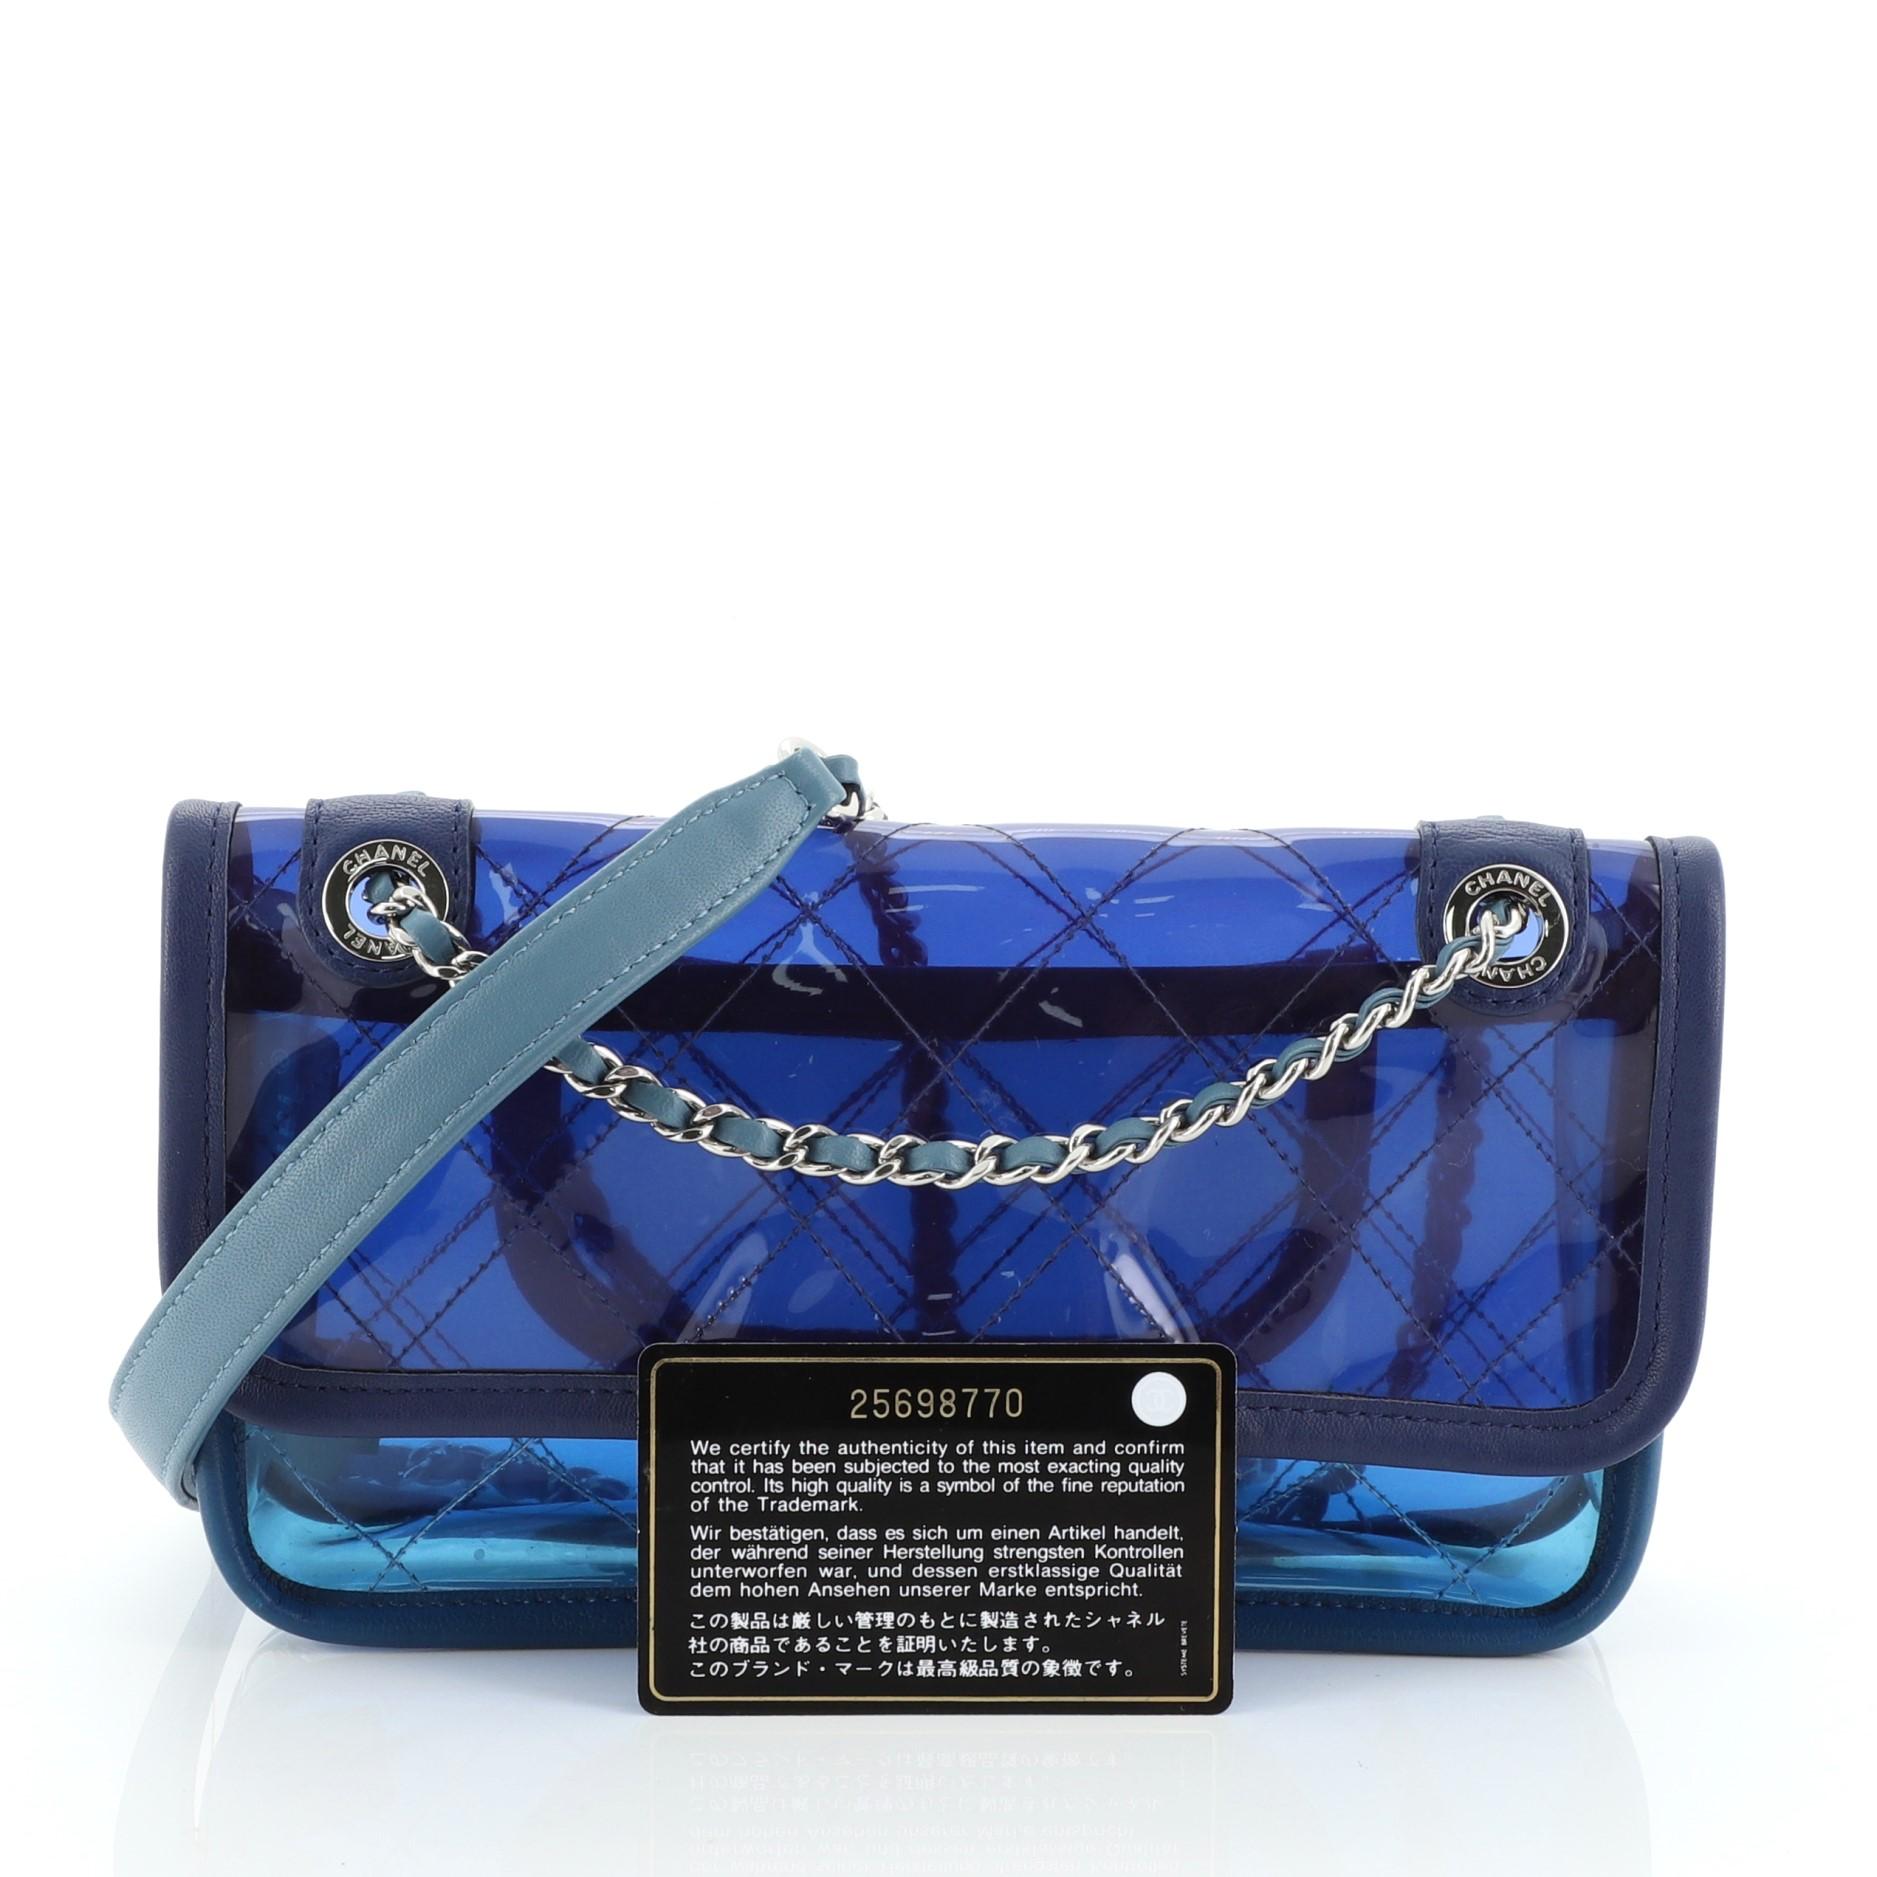 This Chanel Coco Splash Flap Bag Quilted PVC With Lambskin Small, crafted from blue and purple quilted PVC with lambskin leather trim, features woven-in leather chain strap with leather pad, exterior back slip pocket, and silver-tone hardware. Its